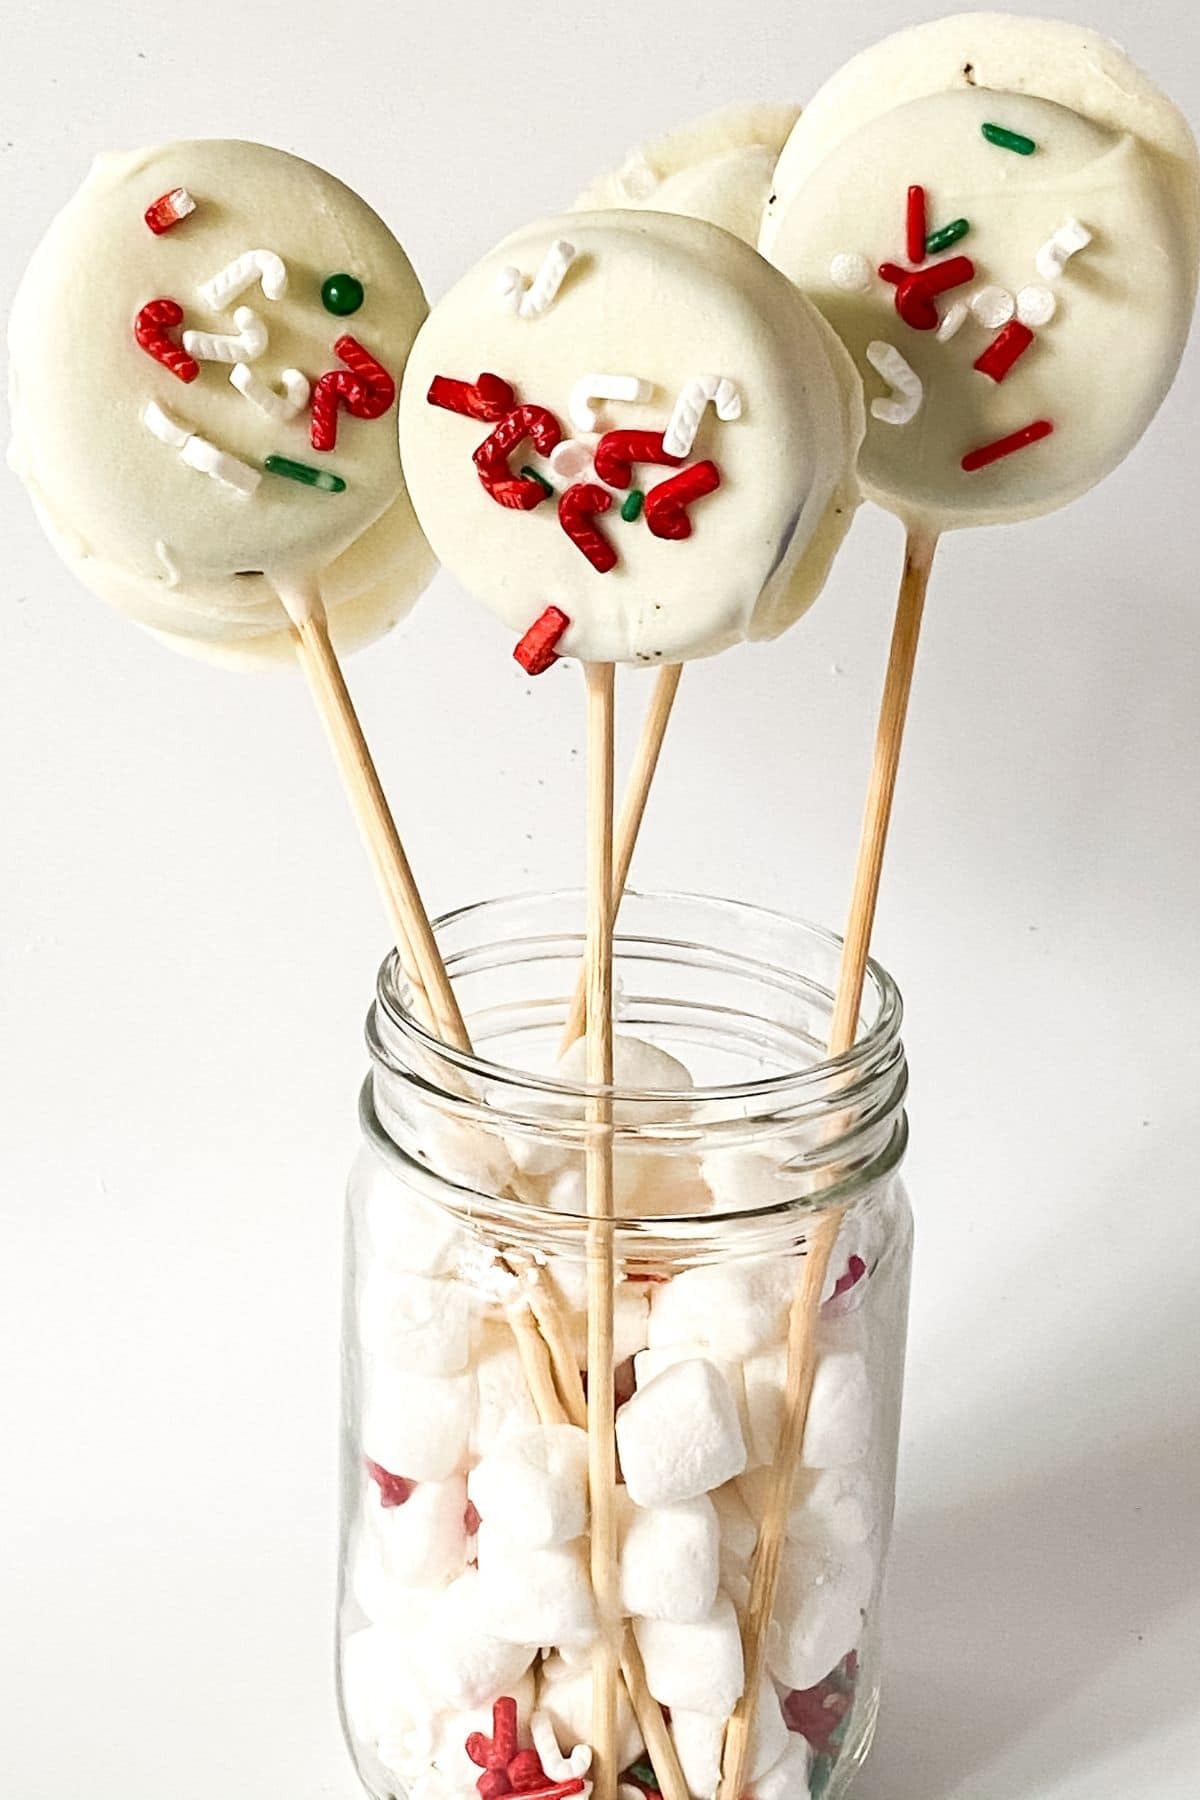 Dipped Oreo pops standing in glass